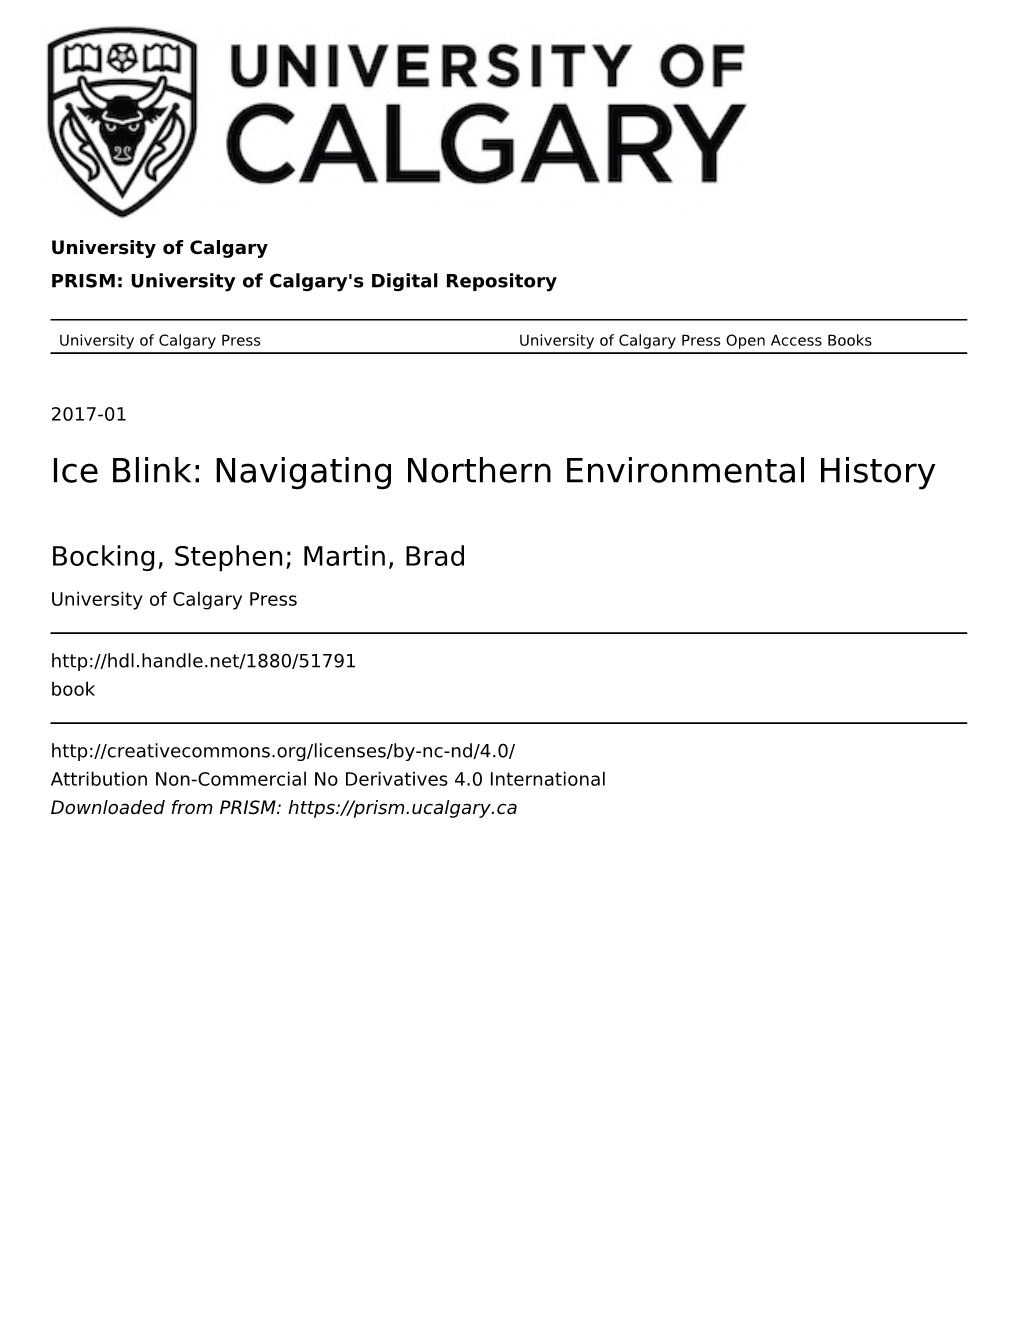 Ghost Towns and Zombie Mines: the Historical Dimensions of Mine Abandonment, Reclamation, and Redevelopment in the Canadian North